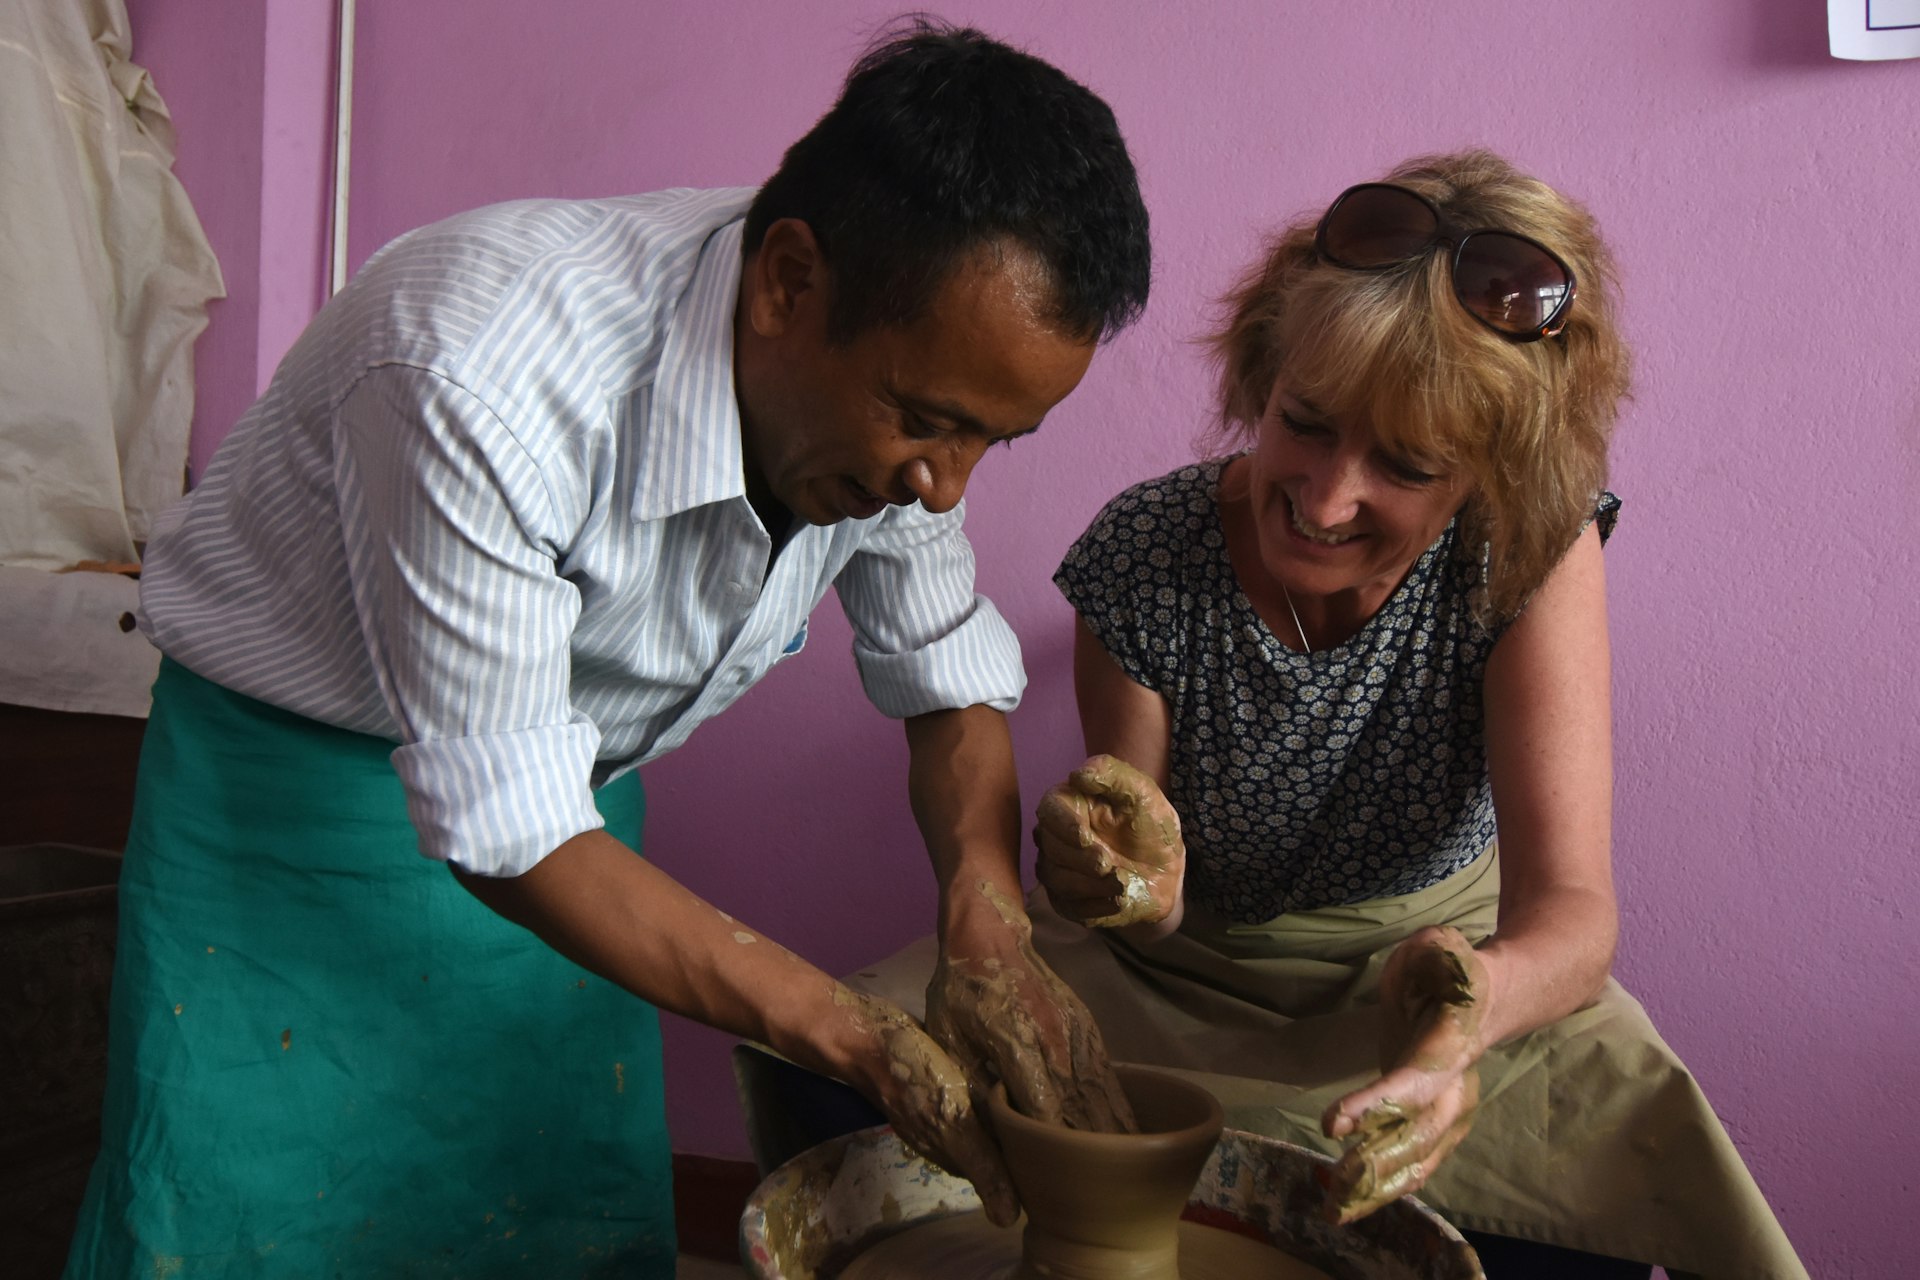 A teacher shows a student how to straighten up the edges on the pot she is making on a pottery wheel